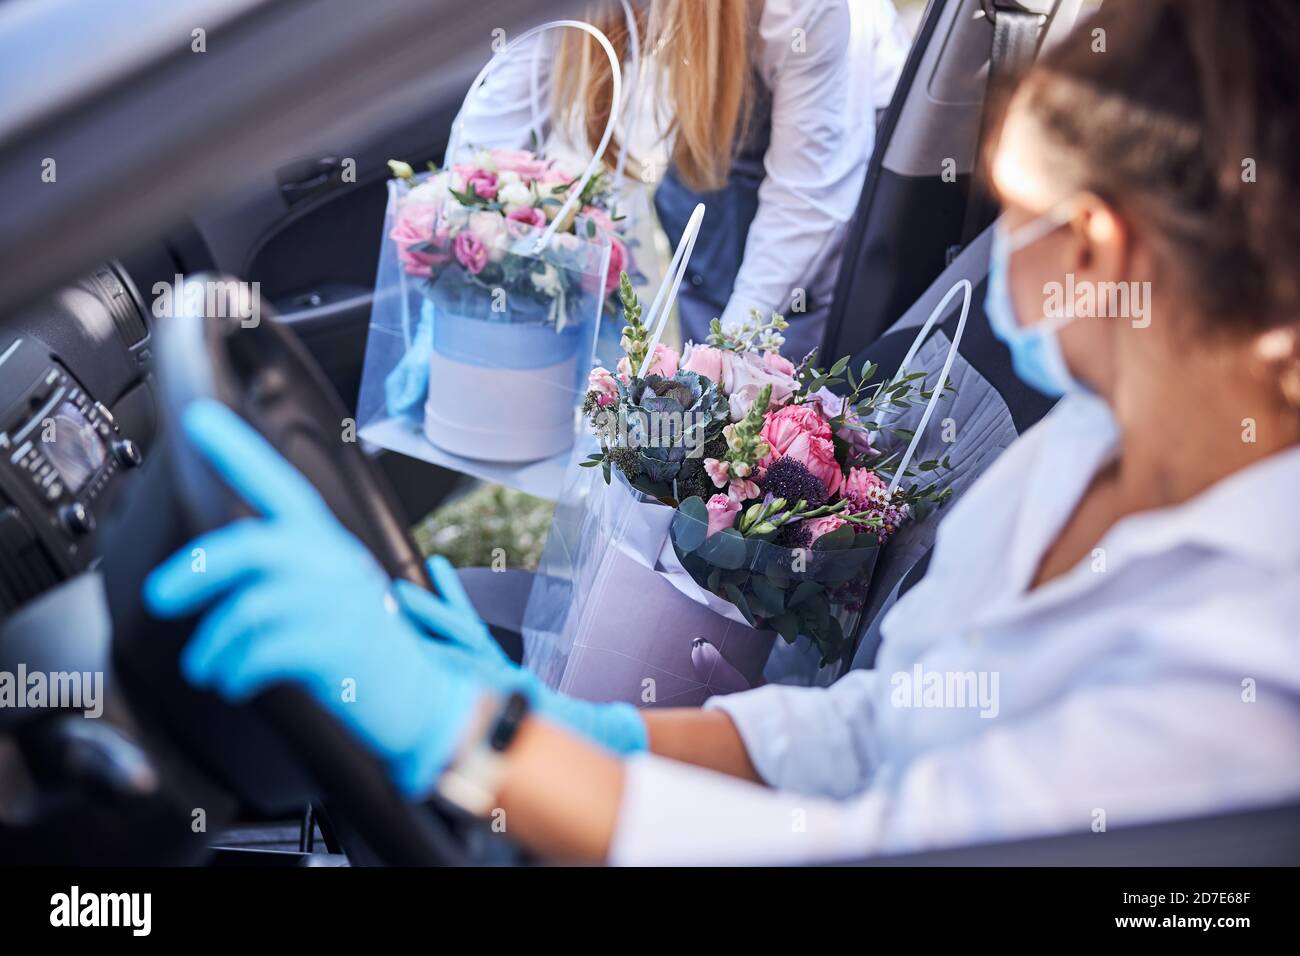 Professional female florist on a flower delivery duty Stock Photo